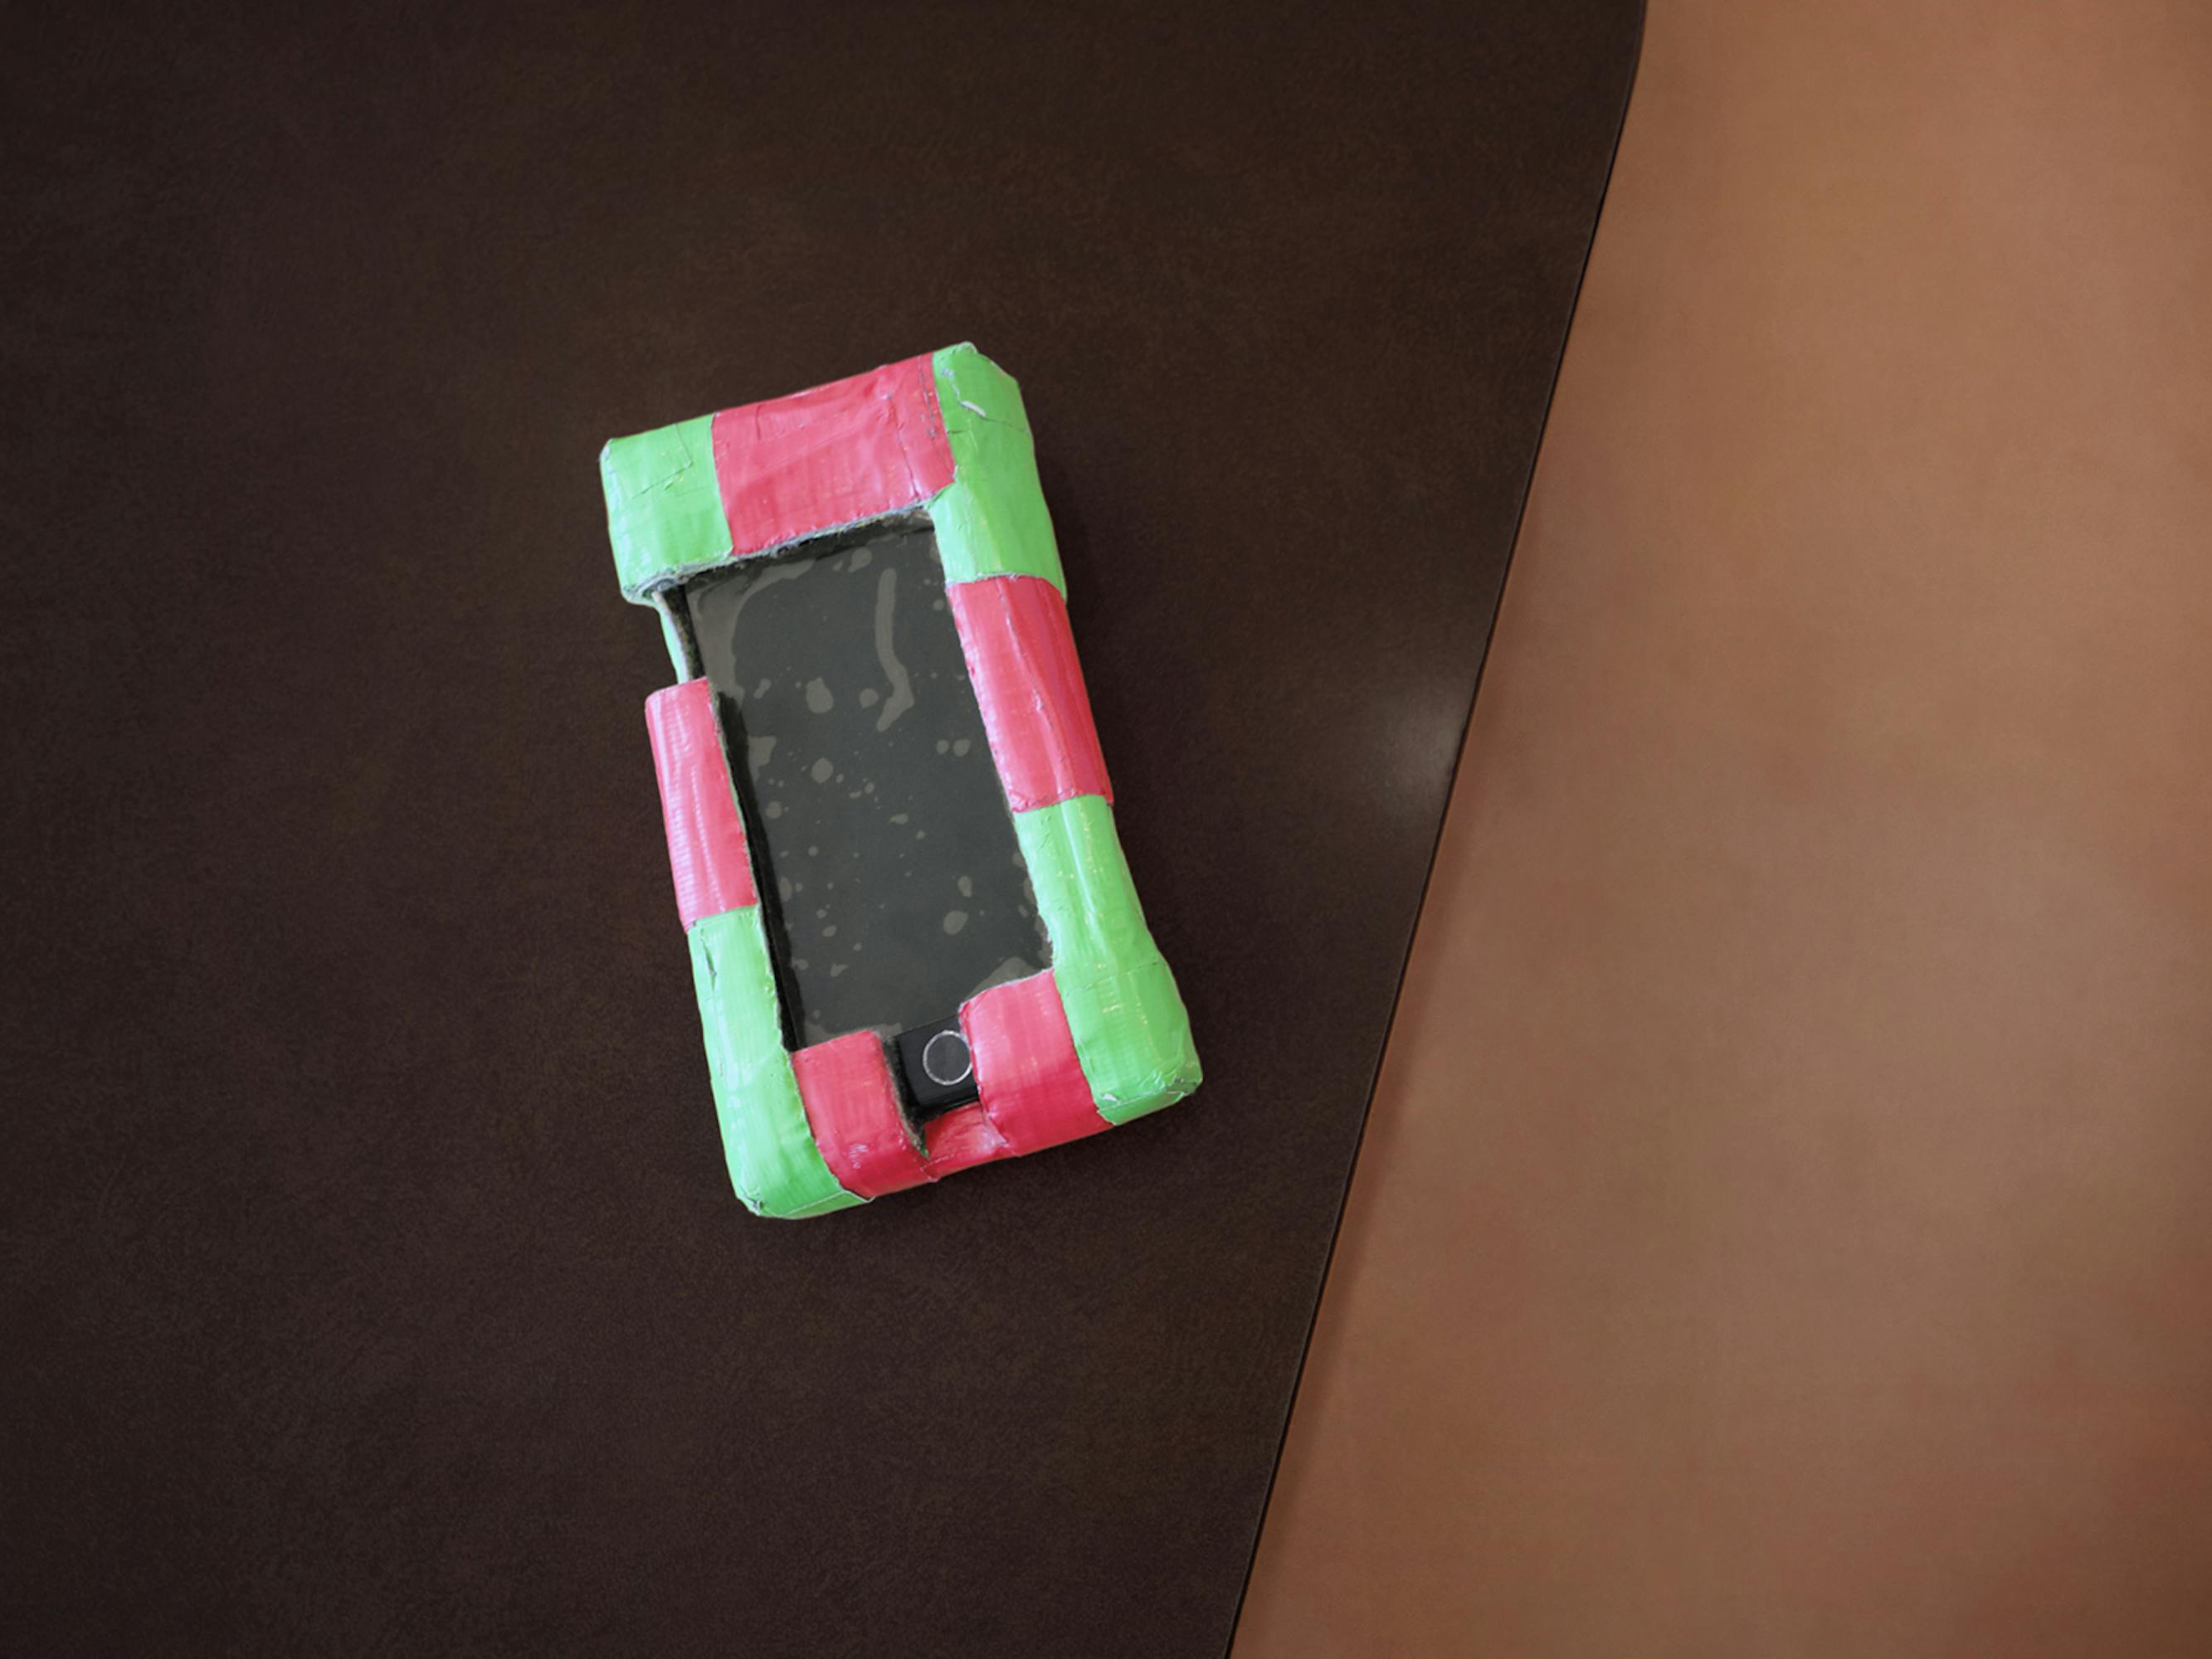 An old iphone with a green and pink case.